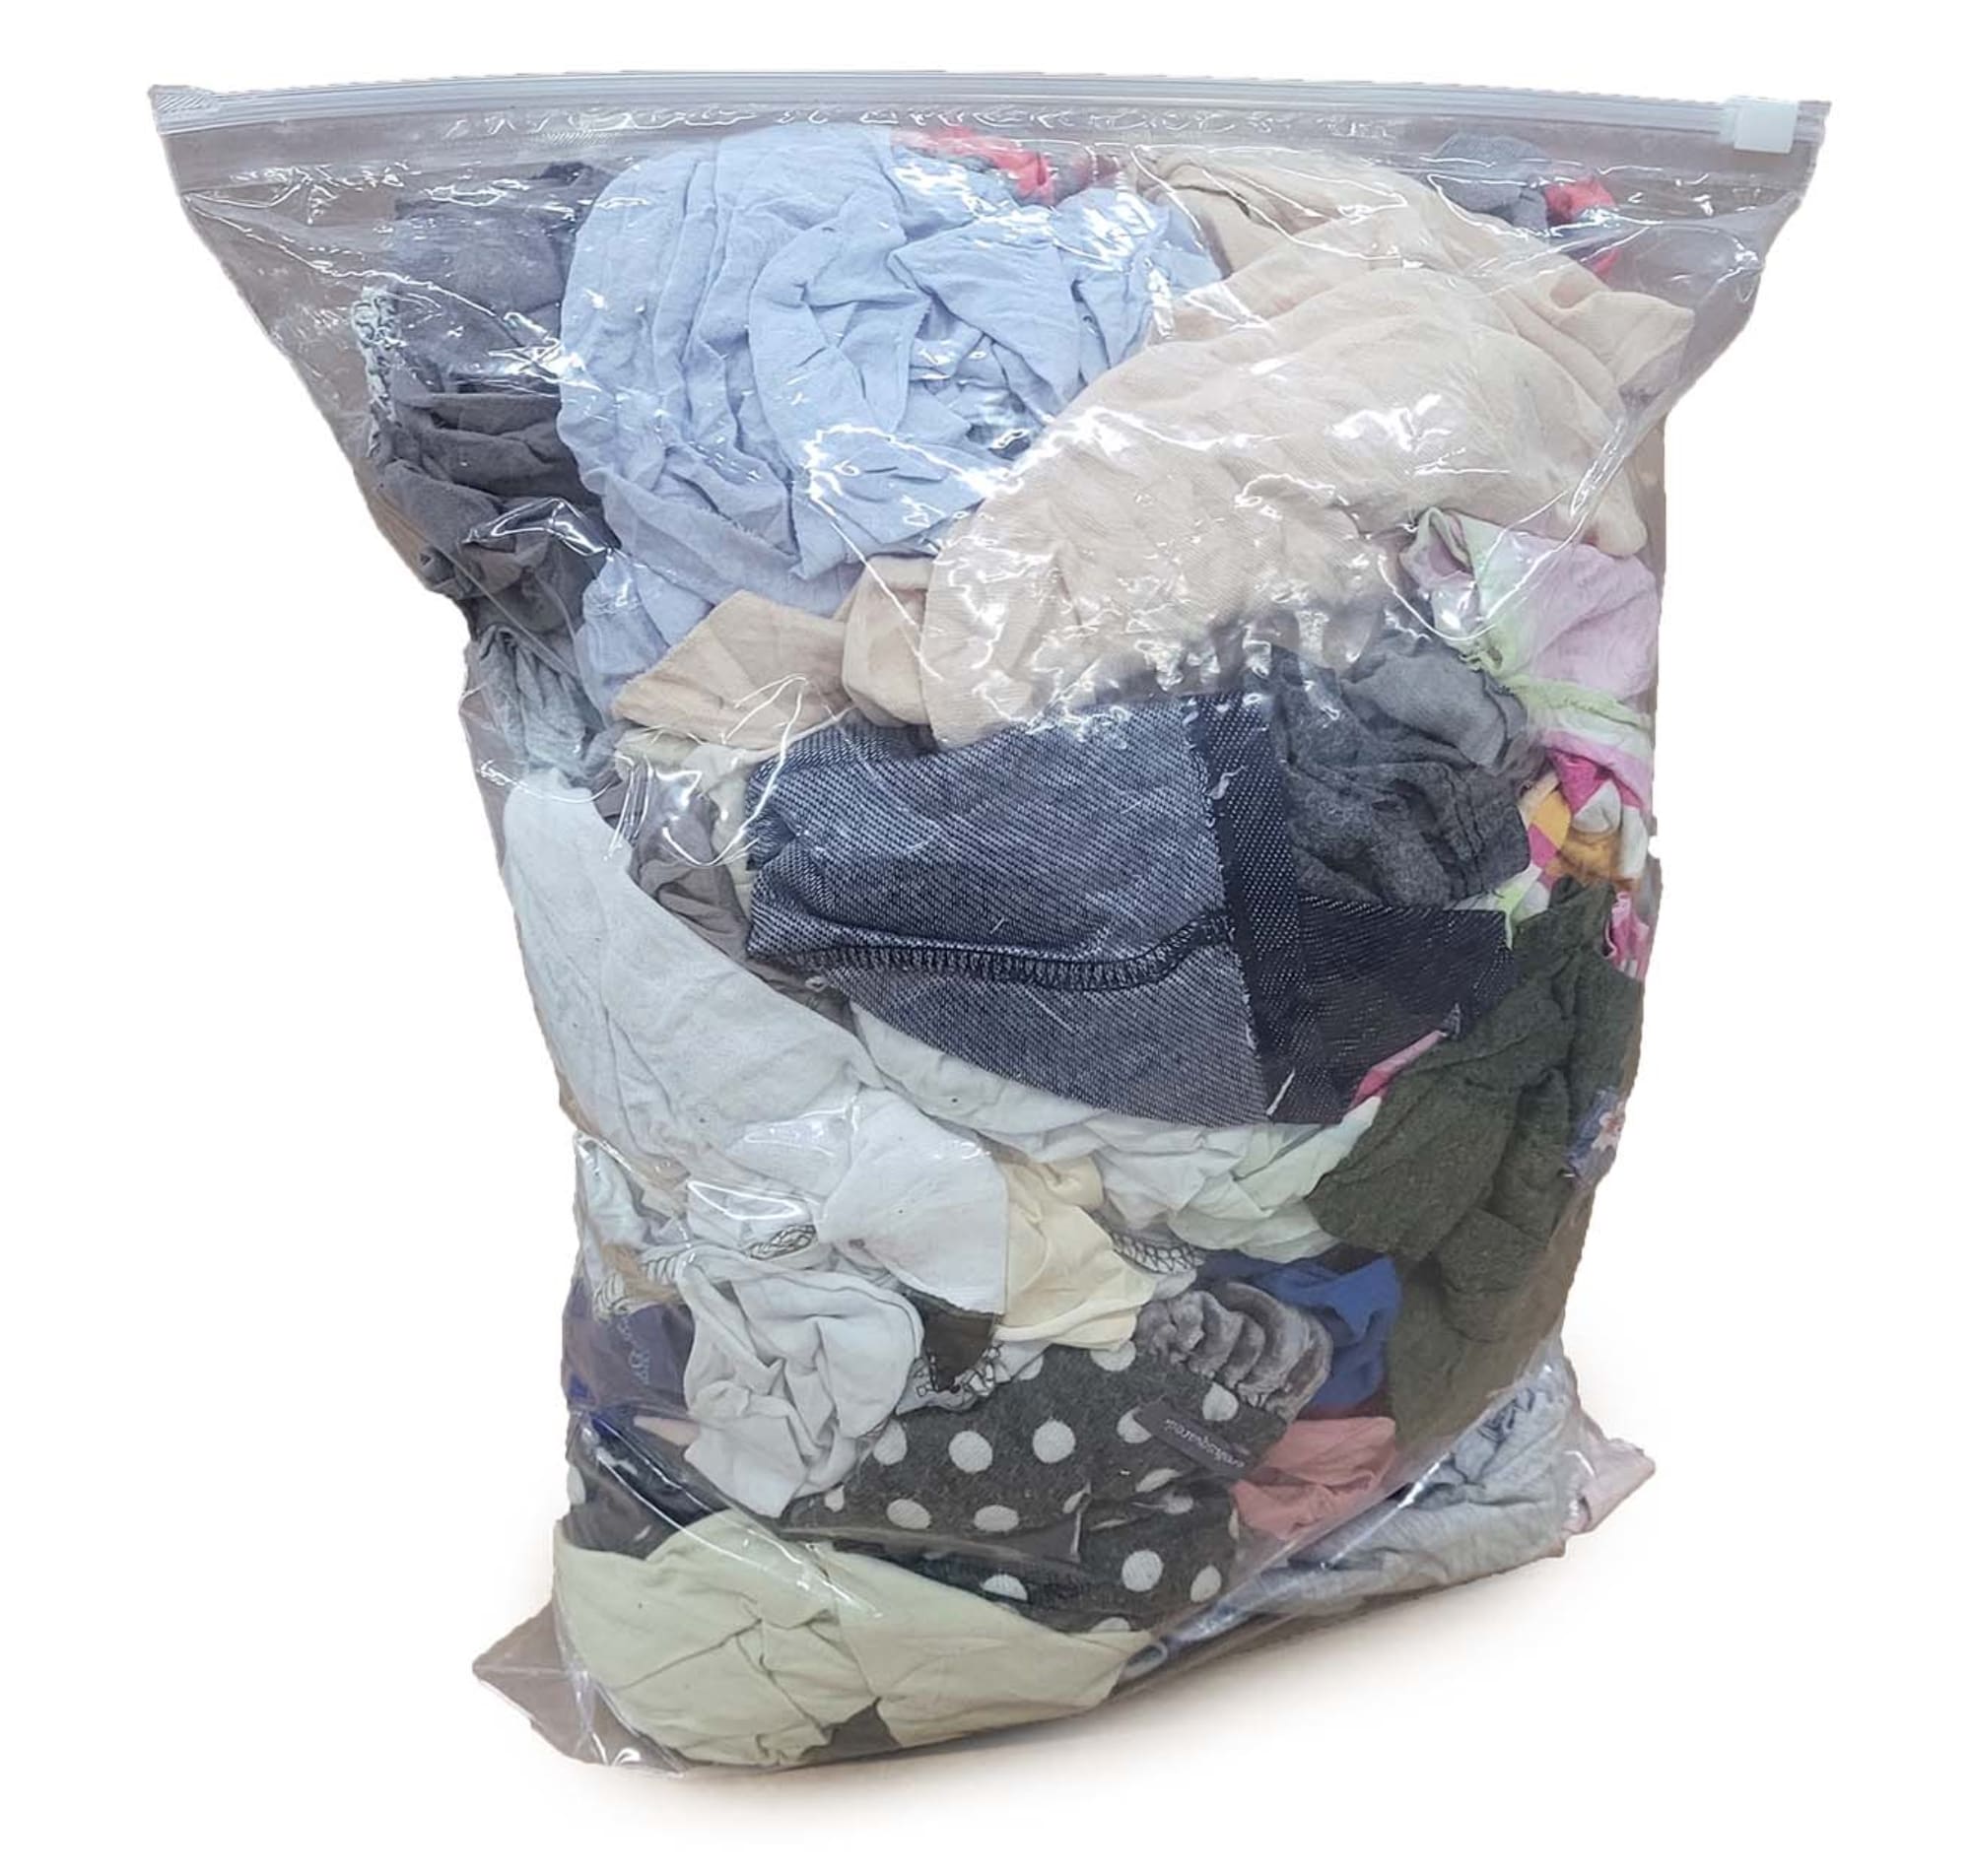 T-shirt Rags Bulk Recycled Mixed Colors 25 Pound Box